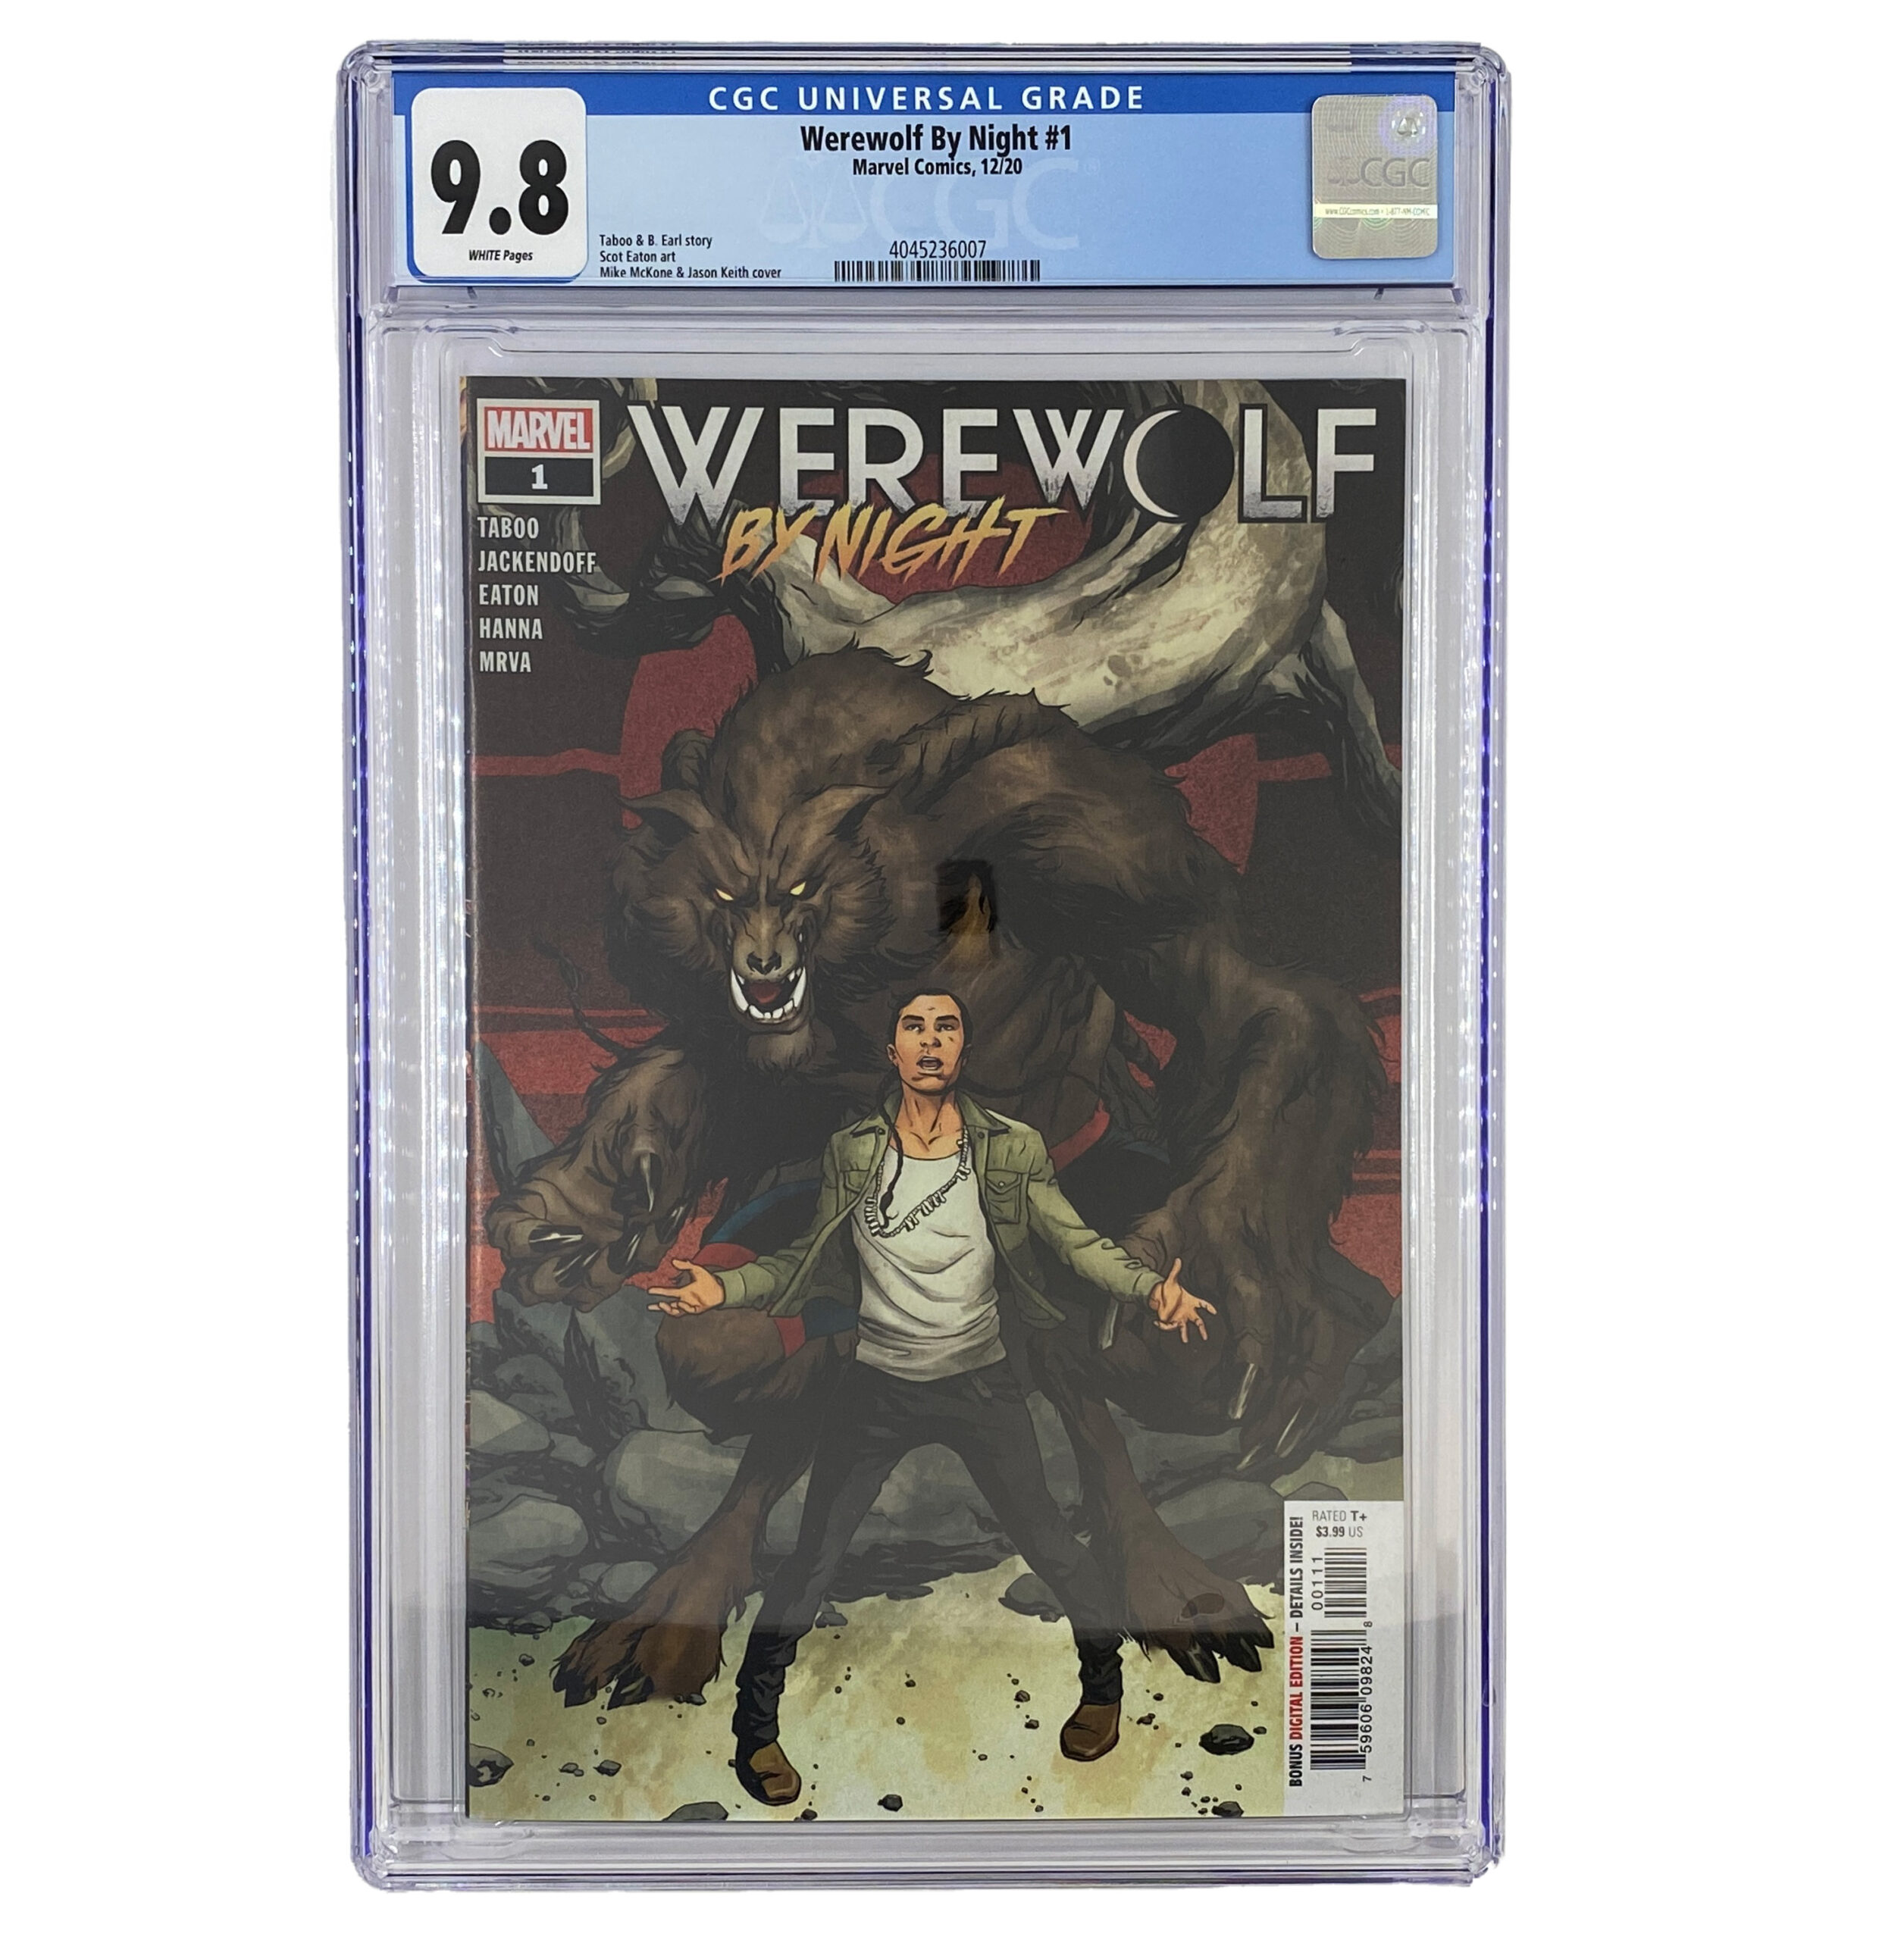 Werewolf By Night #1 Preview - The Comic Book Dispatch